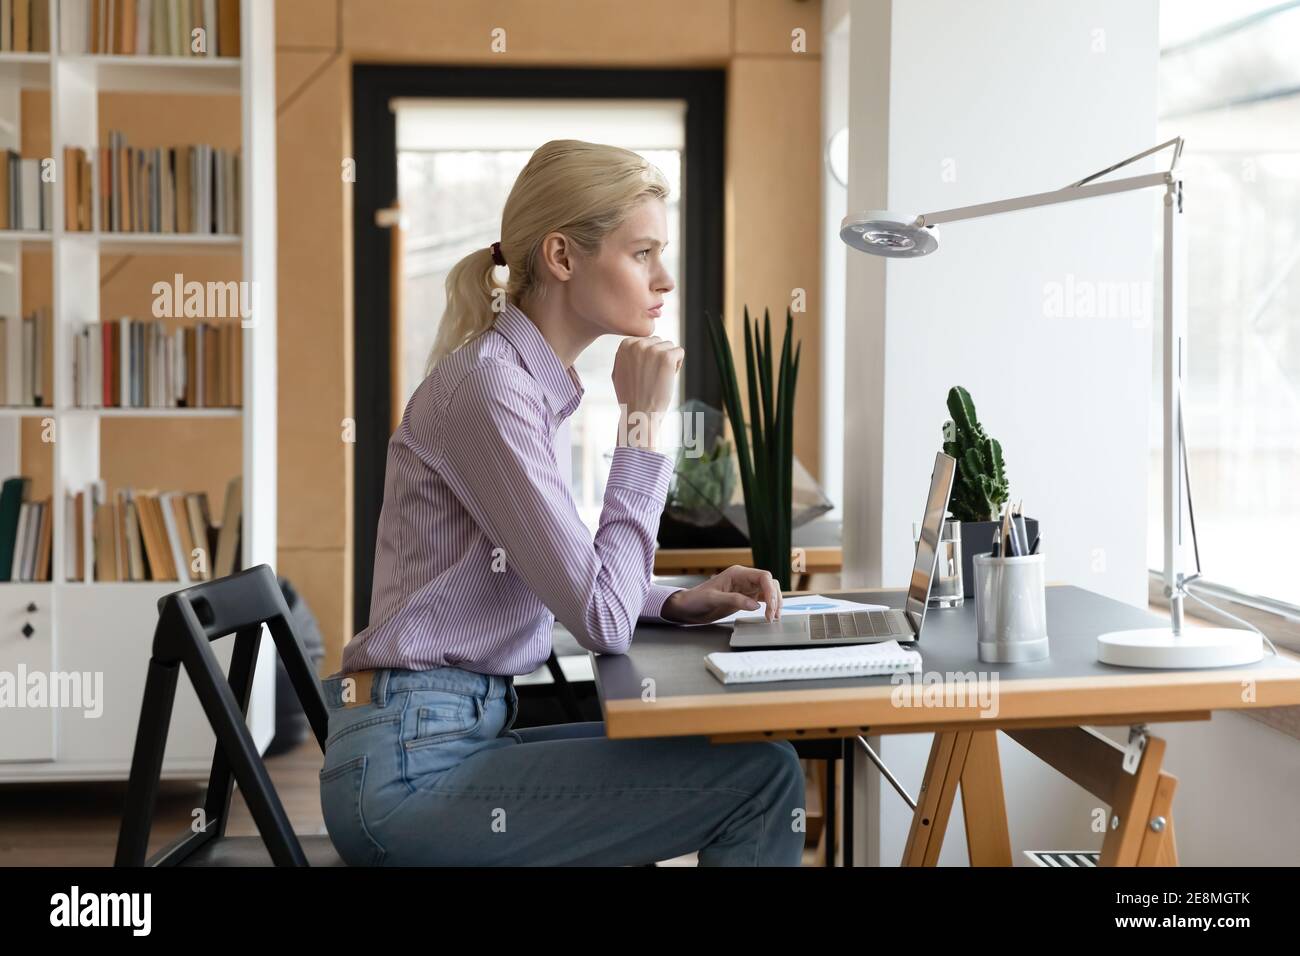 Pensive female entrepreneur looking at window and thinking Stock Photo